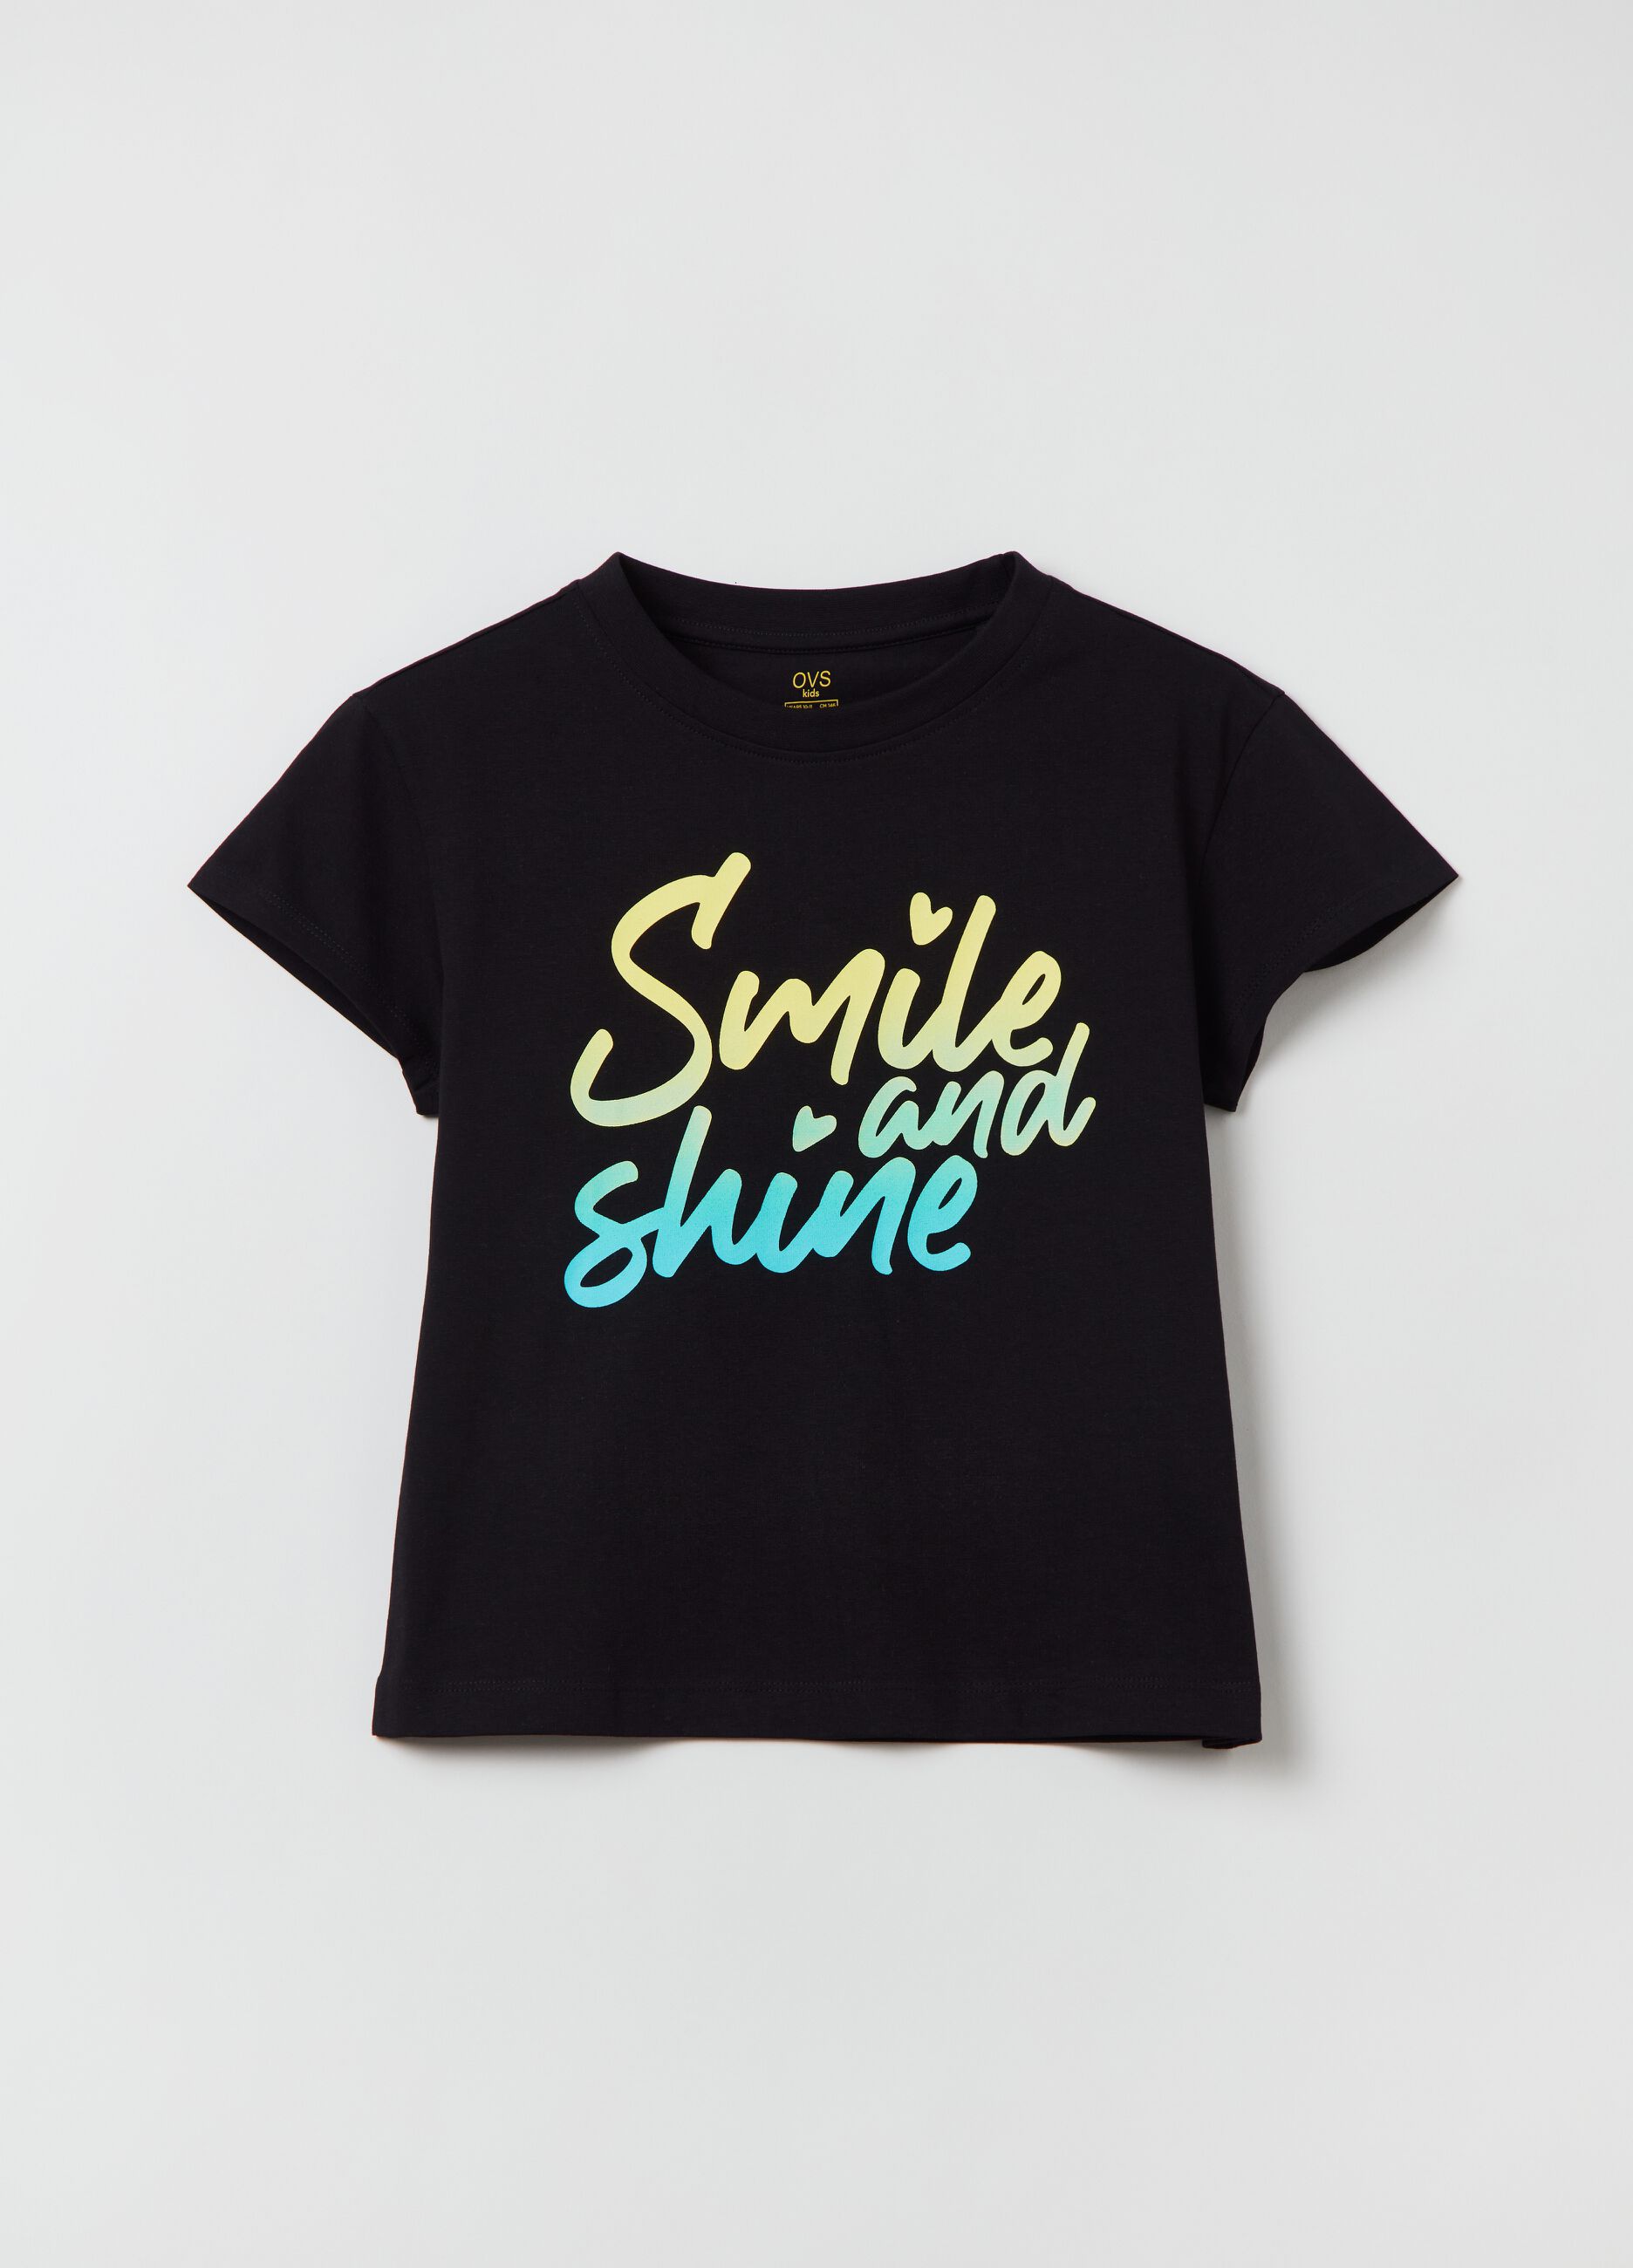 Cotton T-shirt with printed lettering